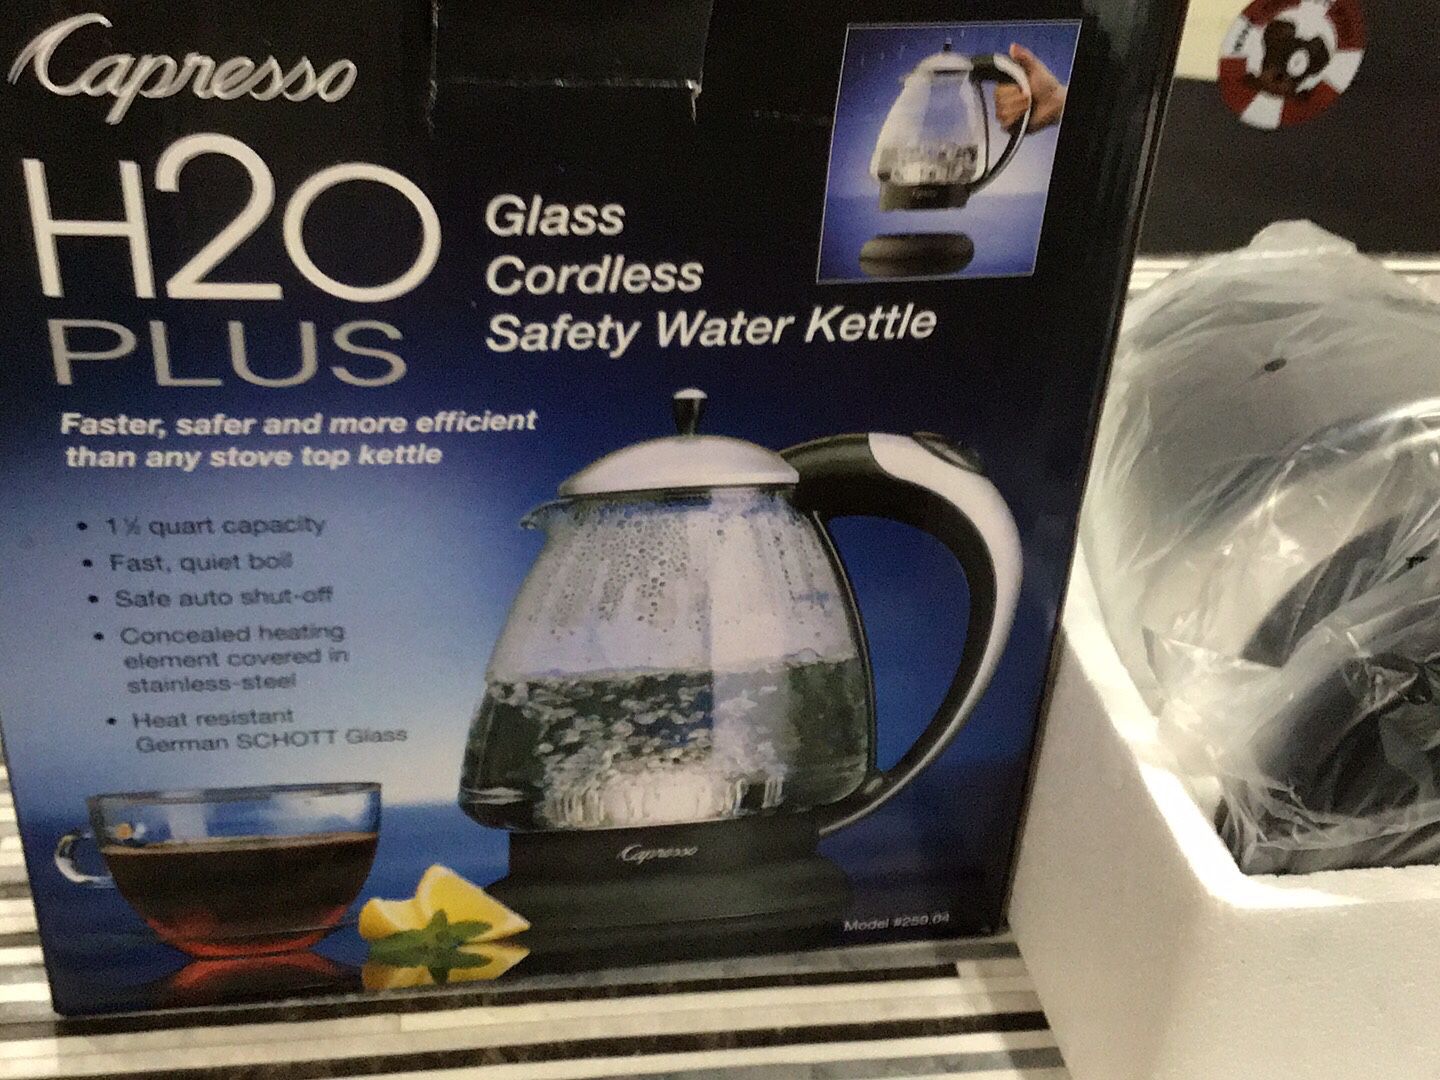 Capresso Glass Cordless Safety Water Kettle New